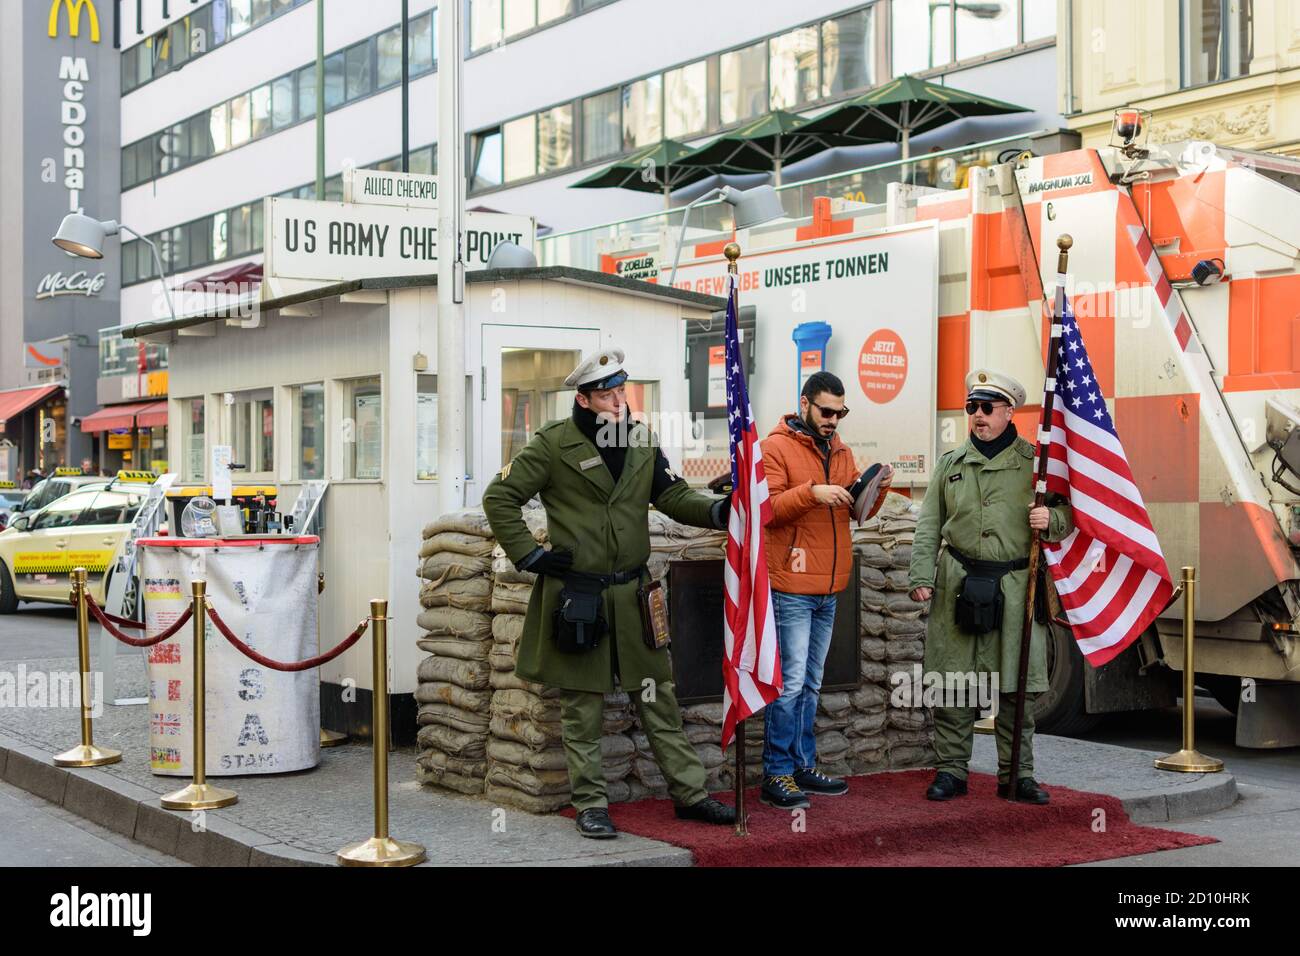 Berlin / Germany - February 15, 2017: Tourist taking photos at Checkpoint Charlie, the best-known Berlin Wall crossing point between East Berlin and W Stock Photo